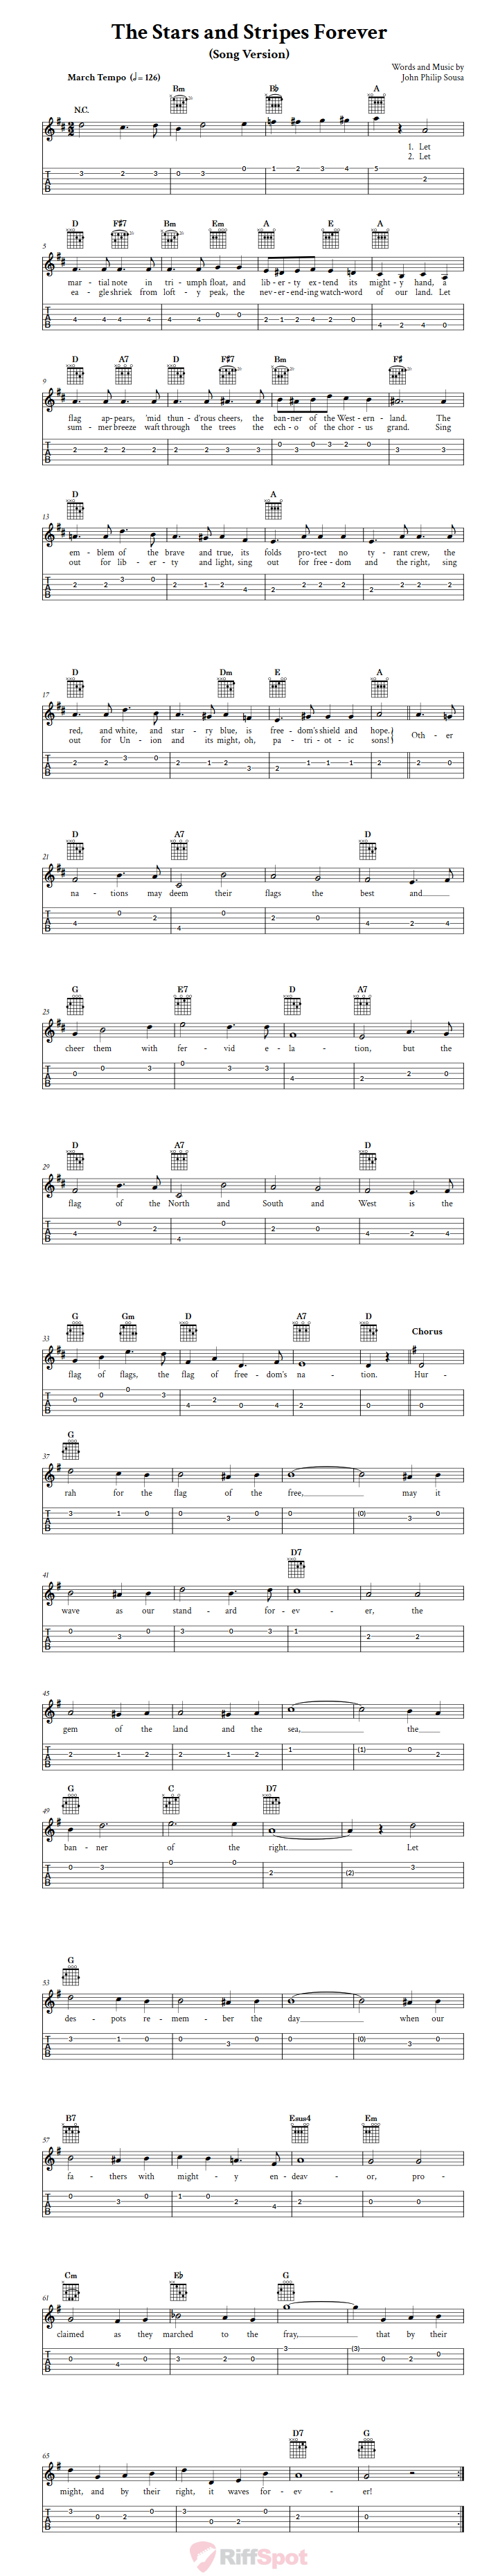 The Stars and Stripes Forever (Song) Guitar Tab